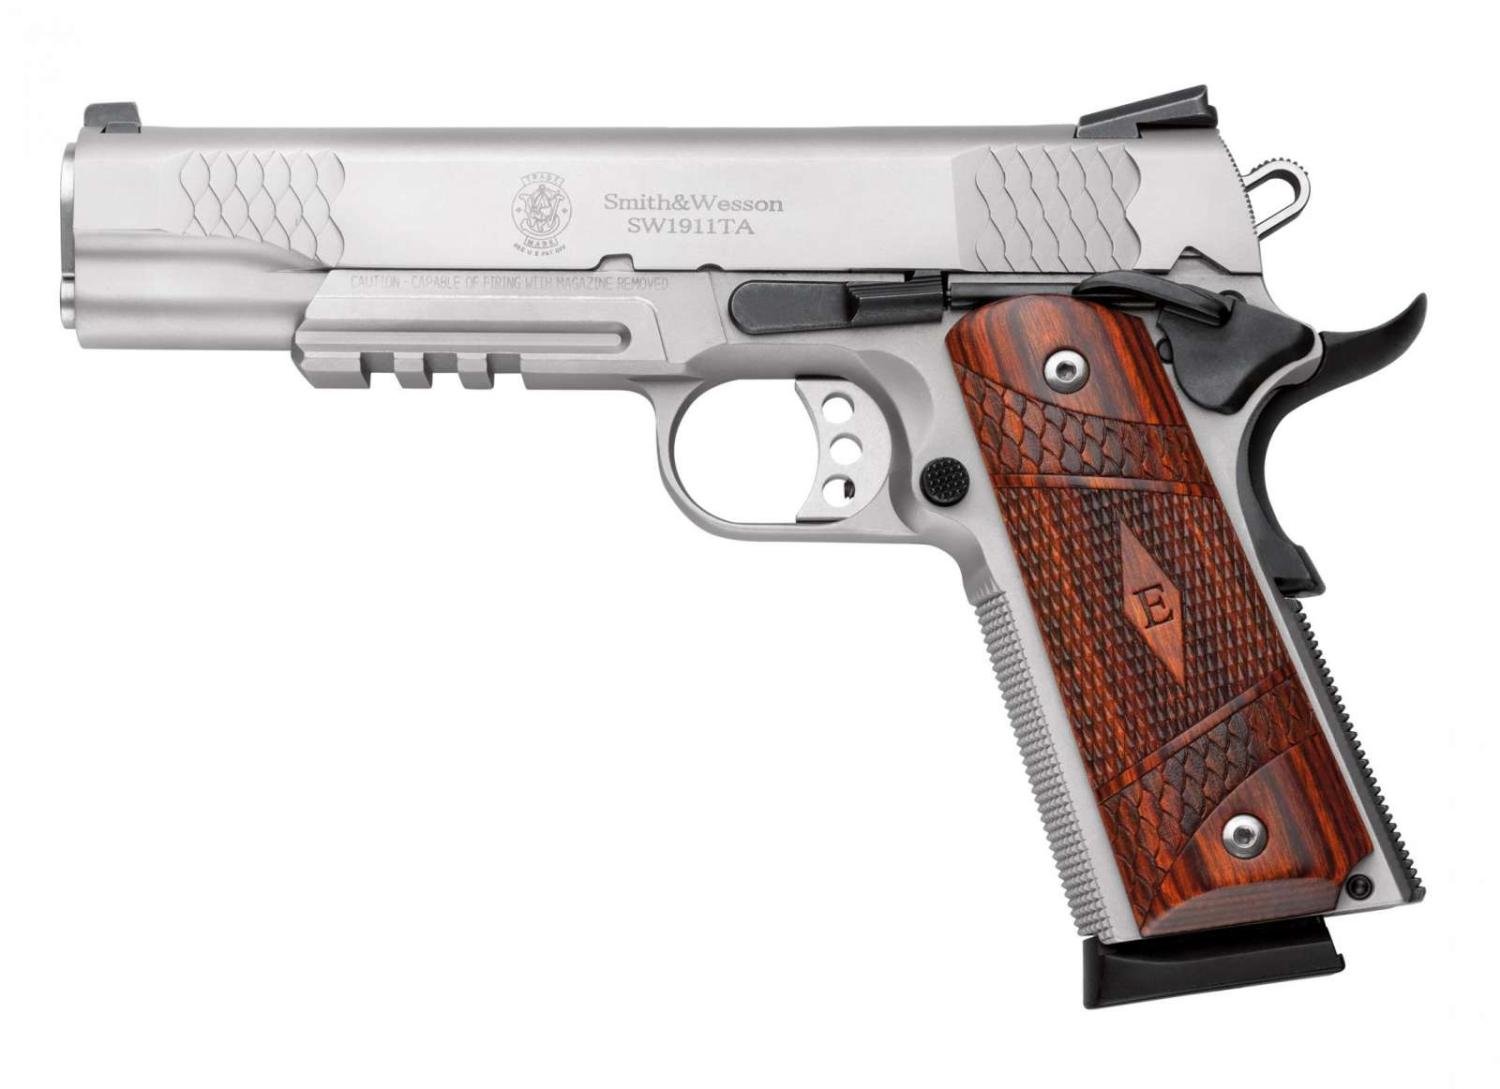 Smith & Wesson 108411 1911 E Series 45 ACP 5" 8+1 Stainless Steel Laminate Wood Grip with Rail - $1305.14